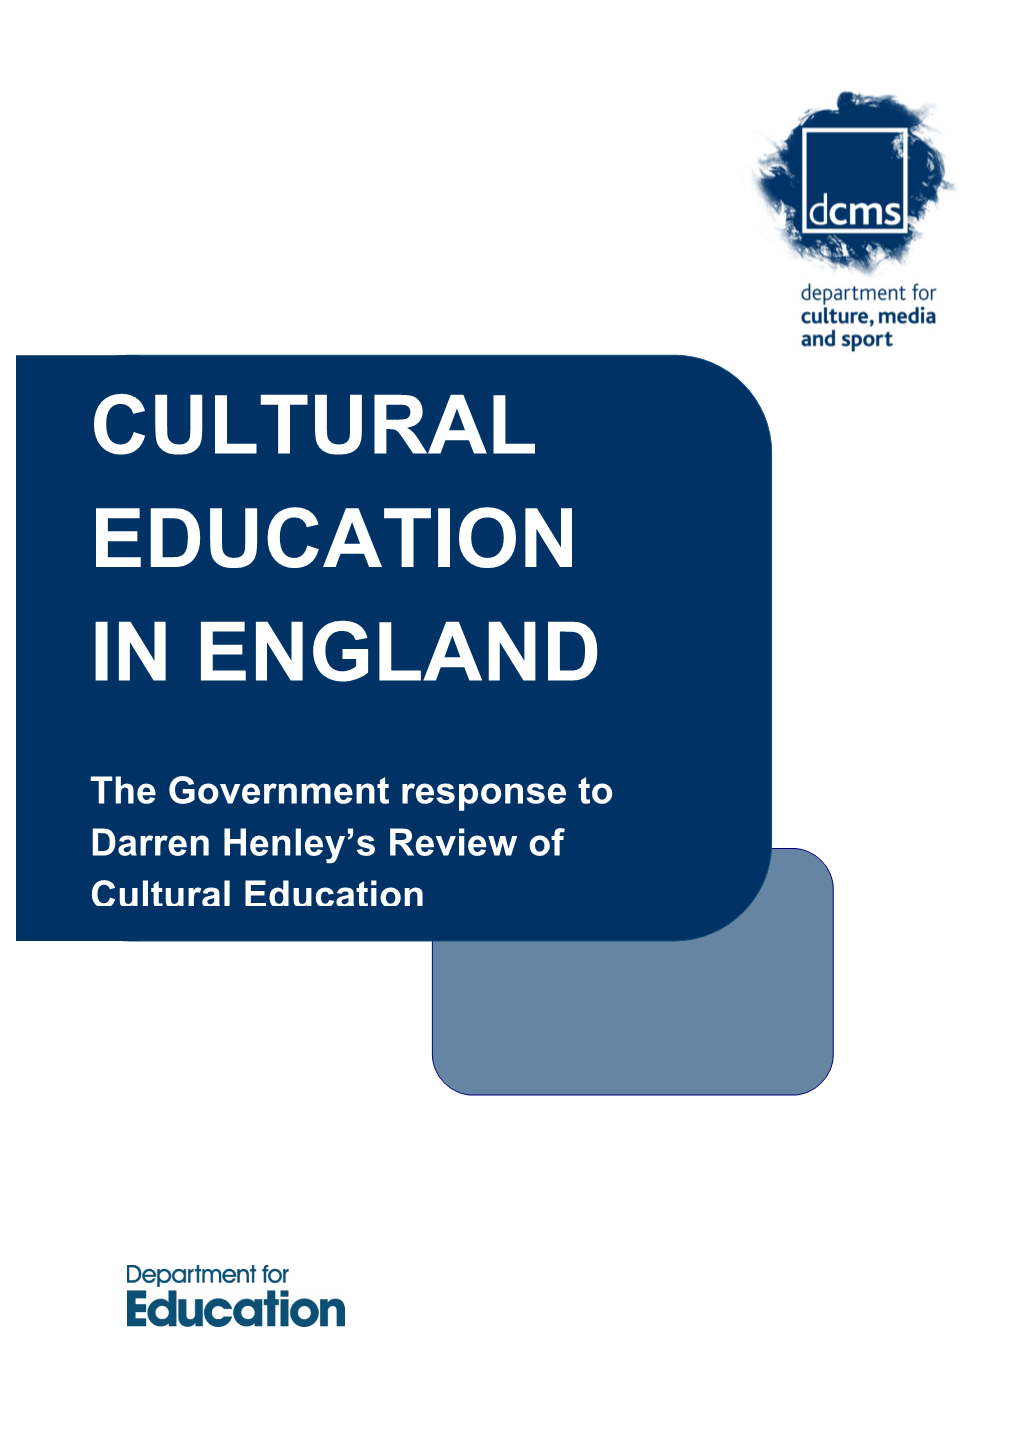 The Government Response to Darren Henley's Review of Cultural